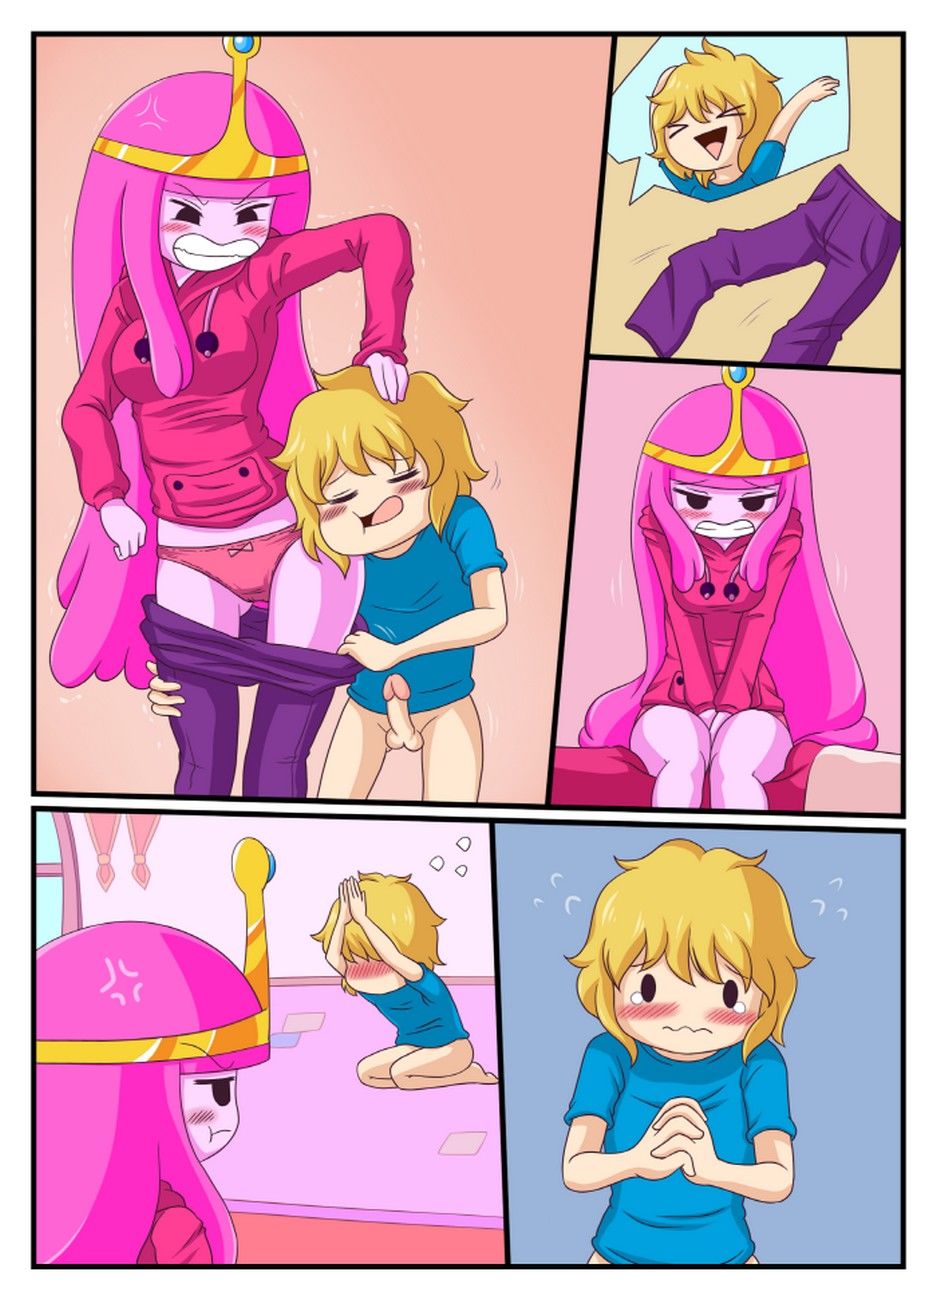 Adventure_Time_-_Adult_Time_1 comix_43435.jpg